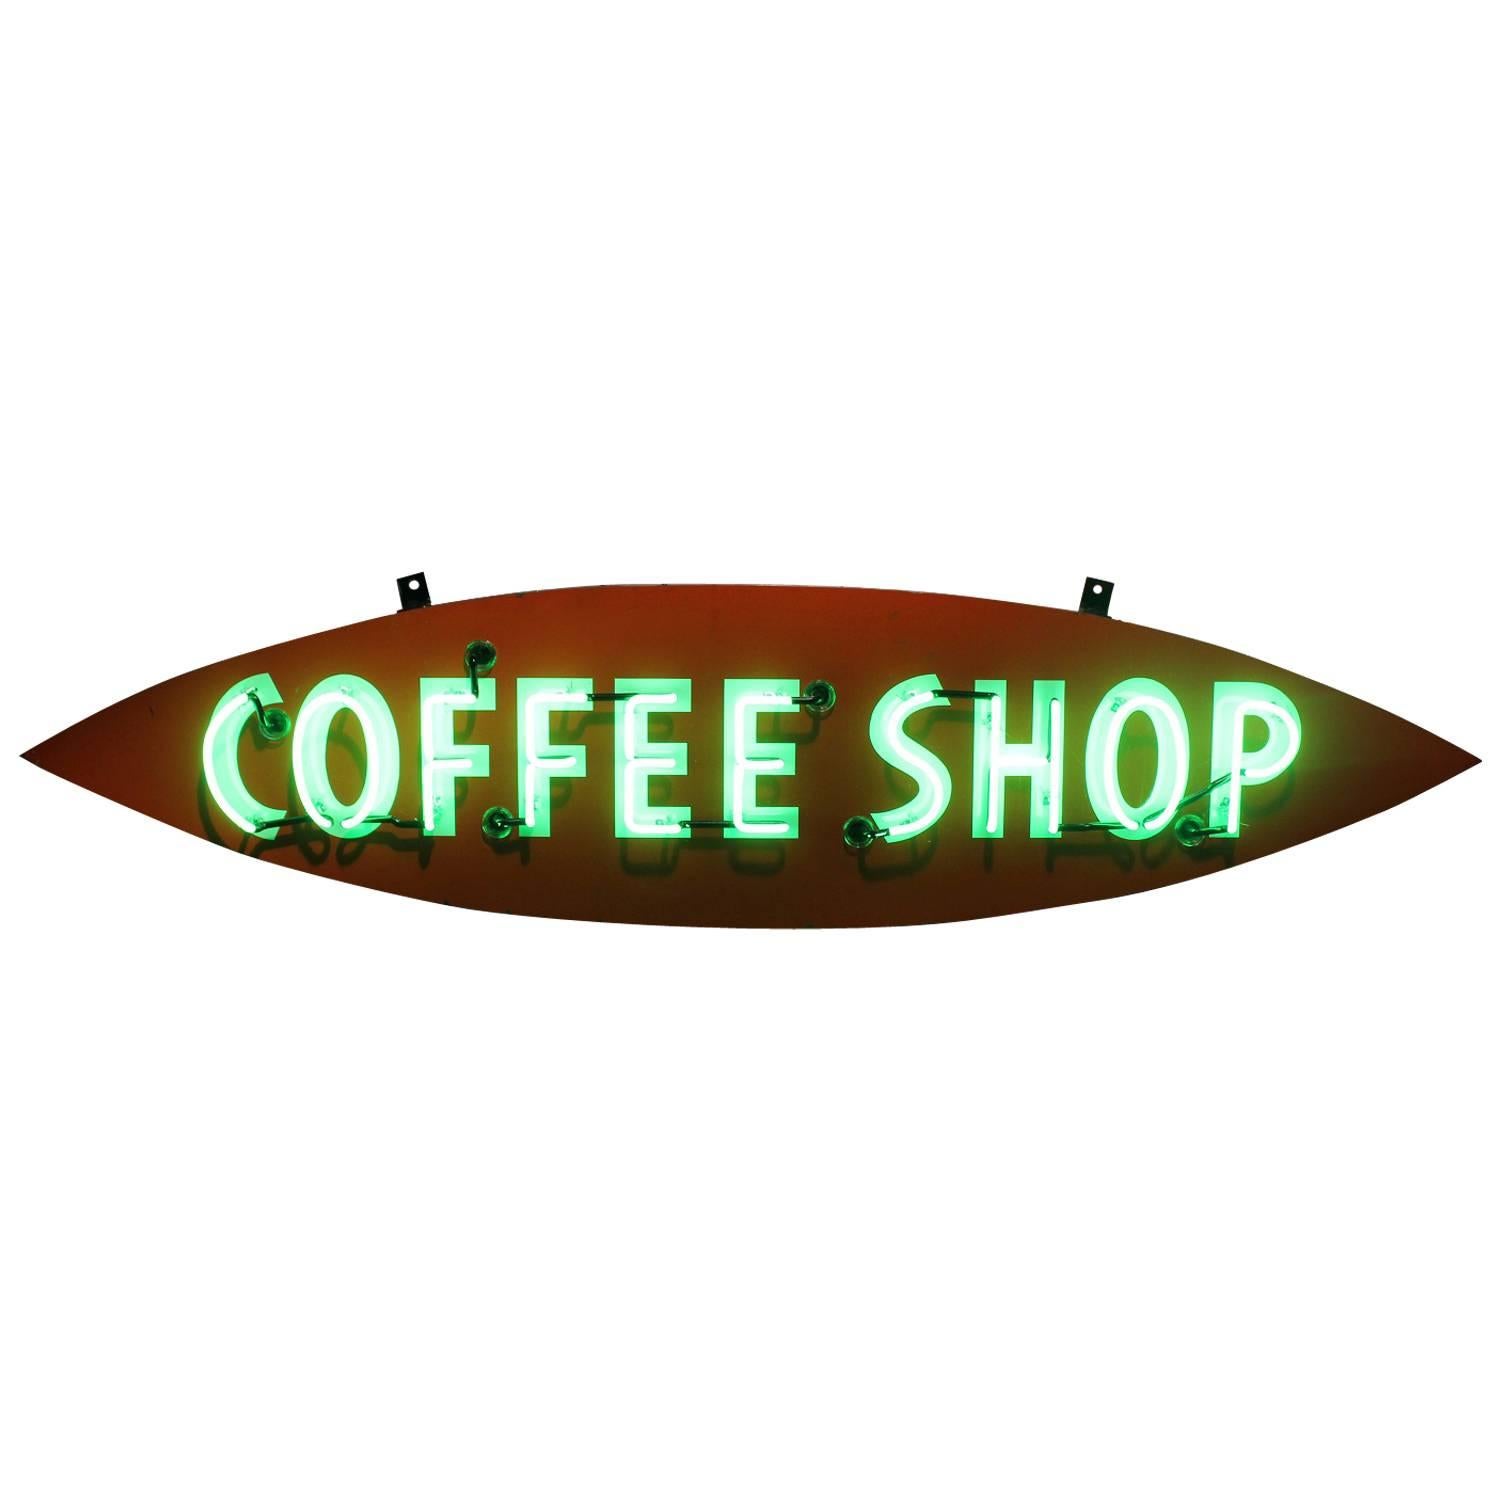 1950s Neon Sign "Coffee Shop" For Sale